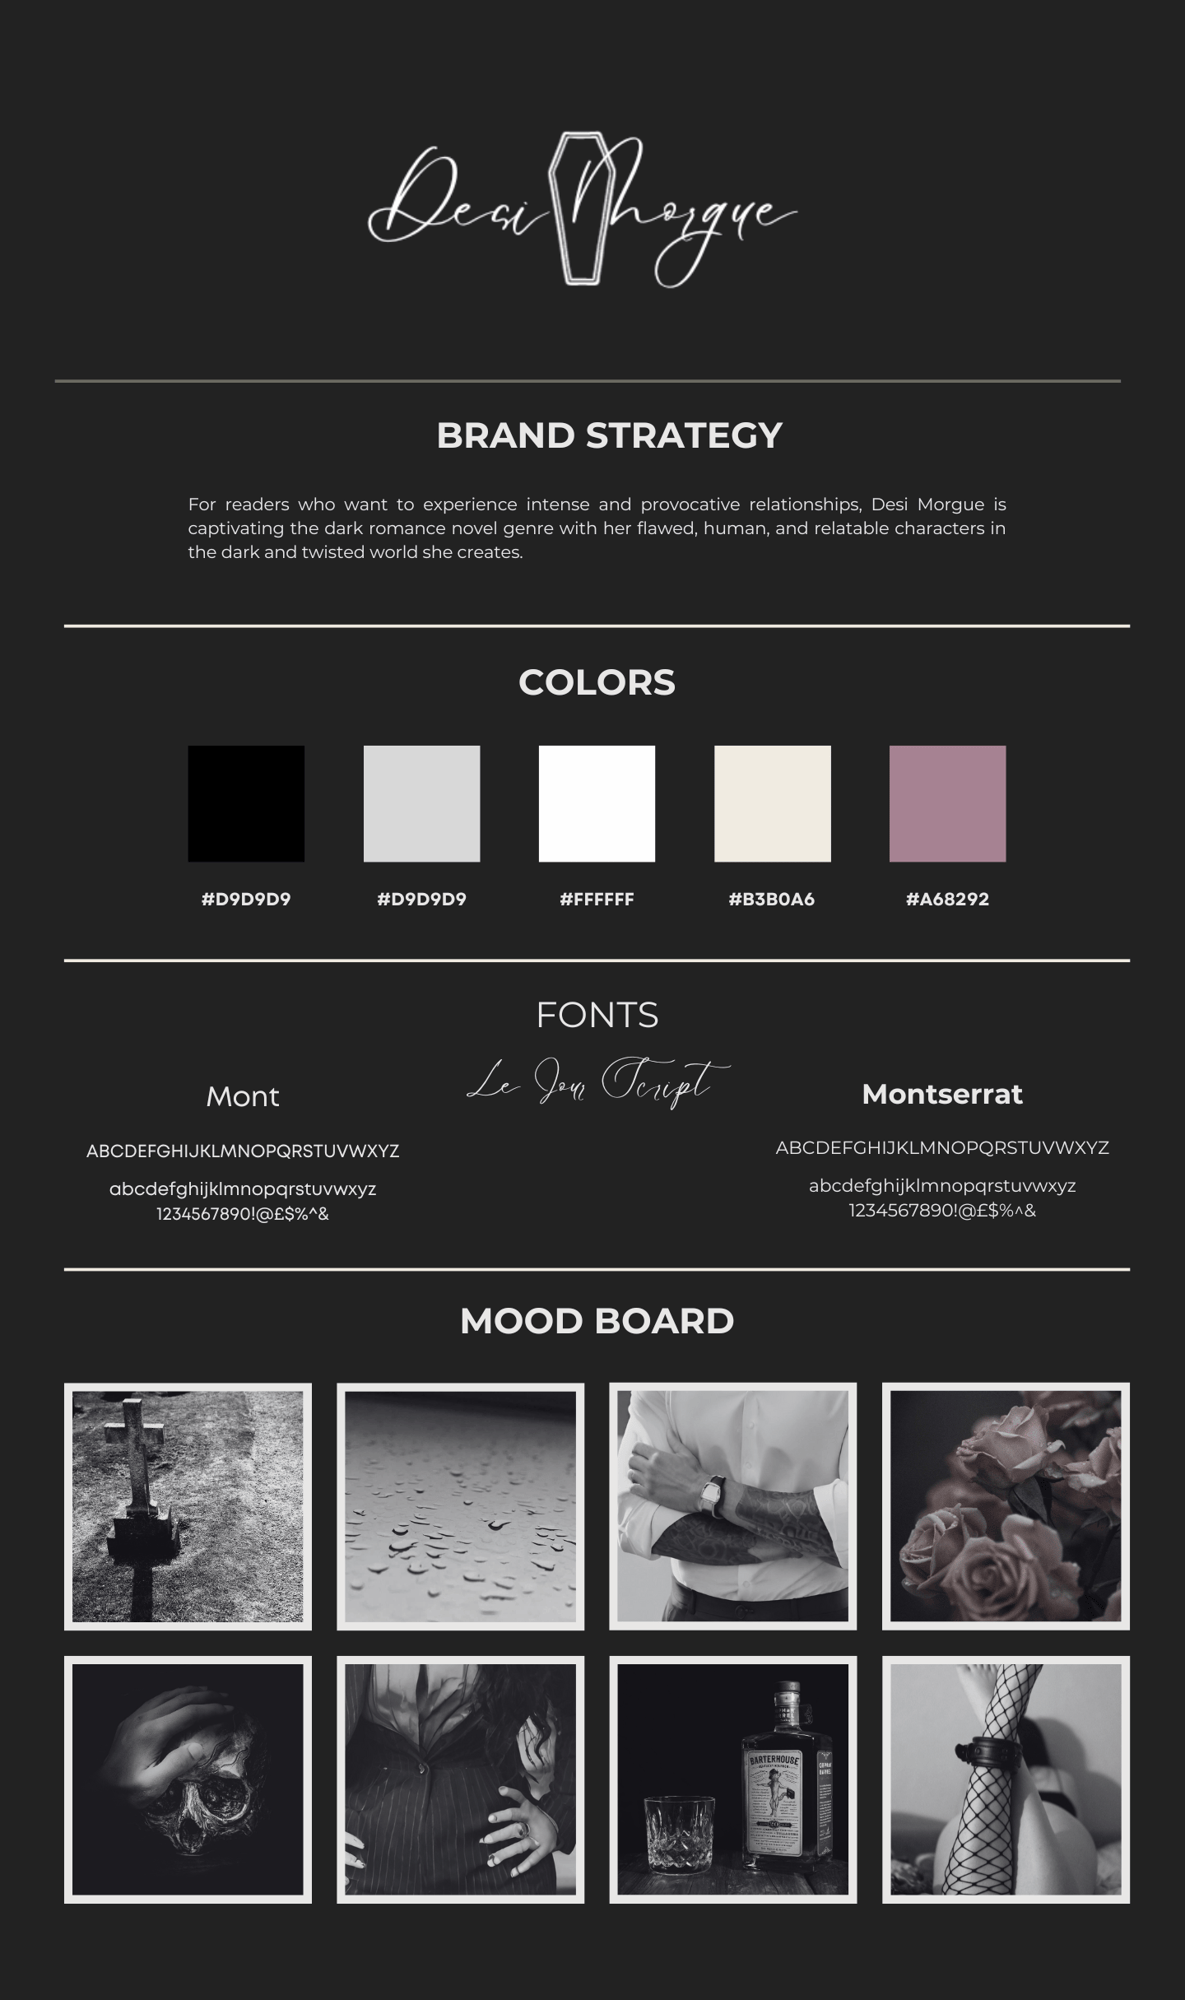 Brand Strategy, Colors, Fonts, and Mood Board for Client Desi Morgue